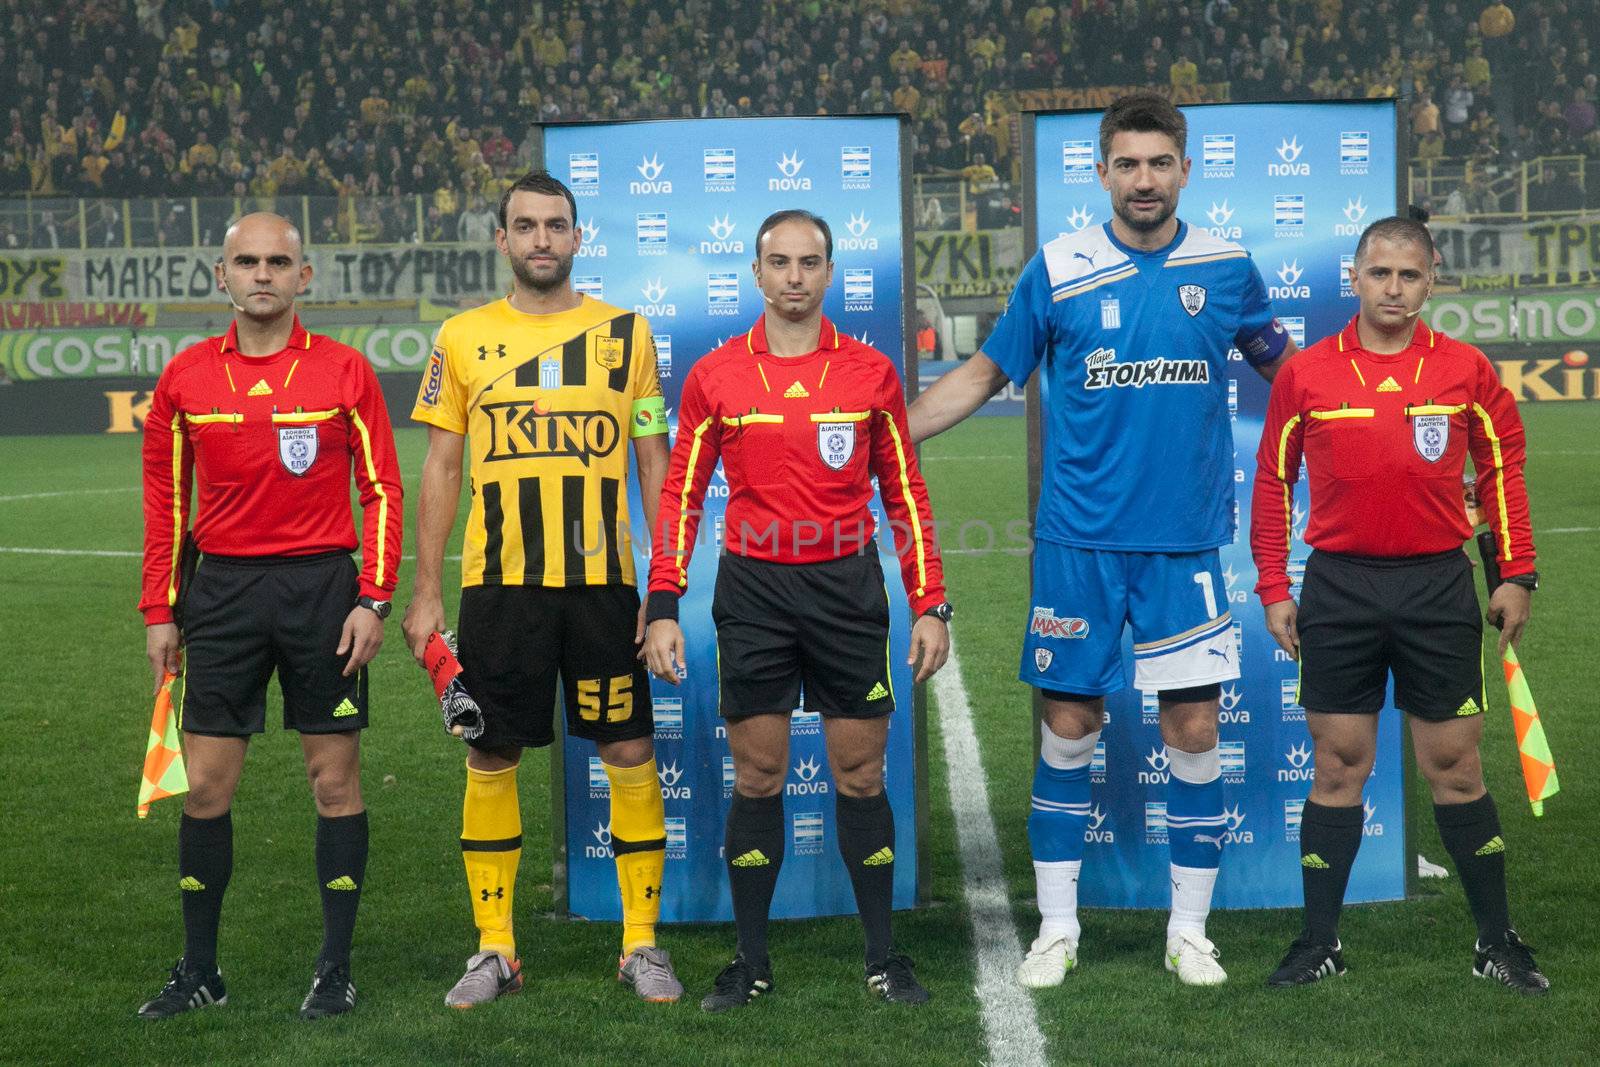 Souvenir picture referees and members of the teams Paok and Aris by Portokalis